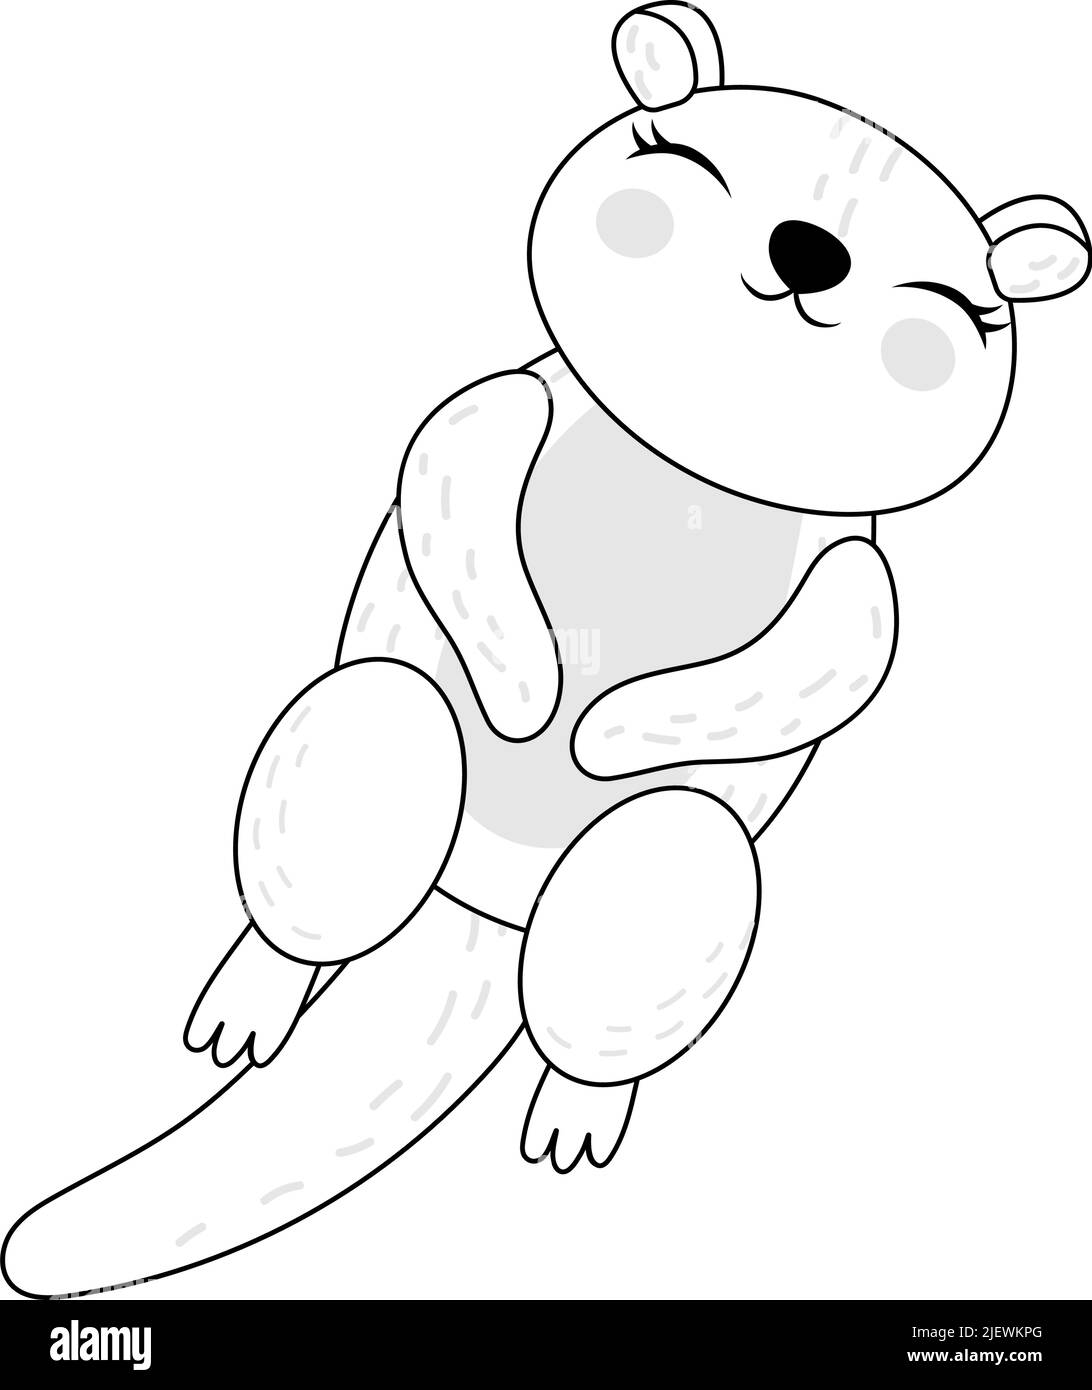 Cute Otters Clipart Black and White for Kids Holidays and Goods. Happy Clip Art Sea Otter Swims on its Back for Coloring Page. Vector Illustration of Stock Vector